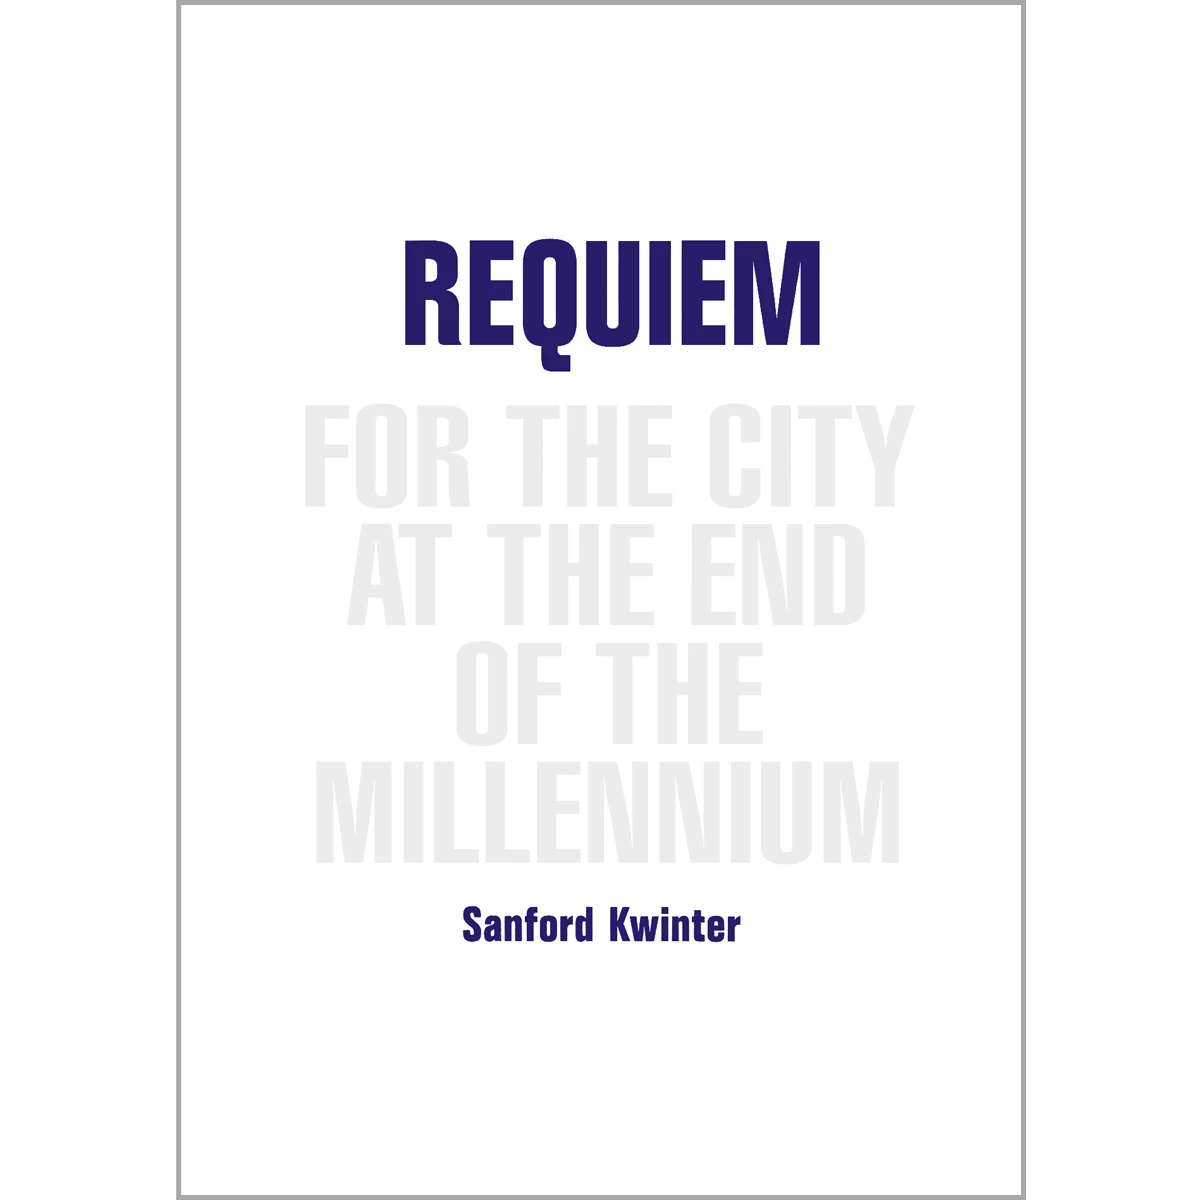 Requiem for the City  at the End of the Millennium